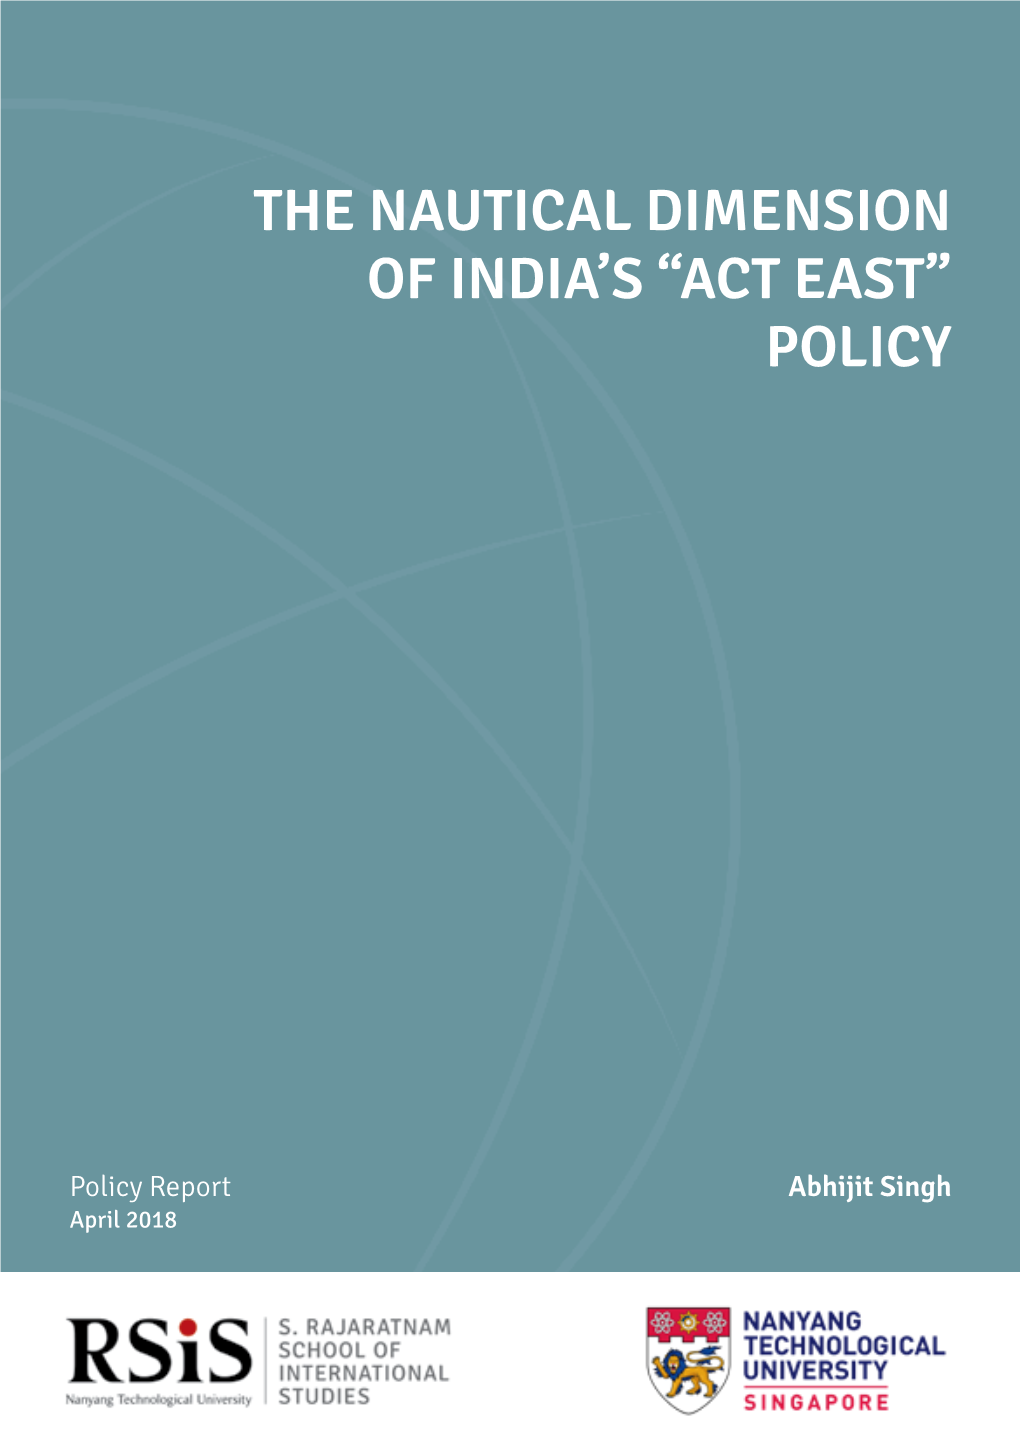 The Nautical Dimension of India's “Act East” Policy